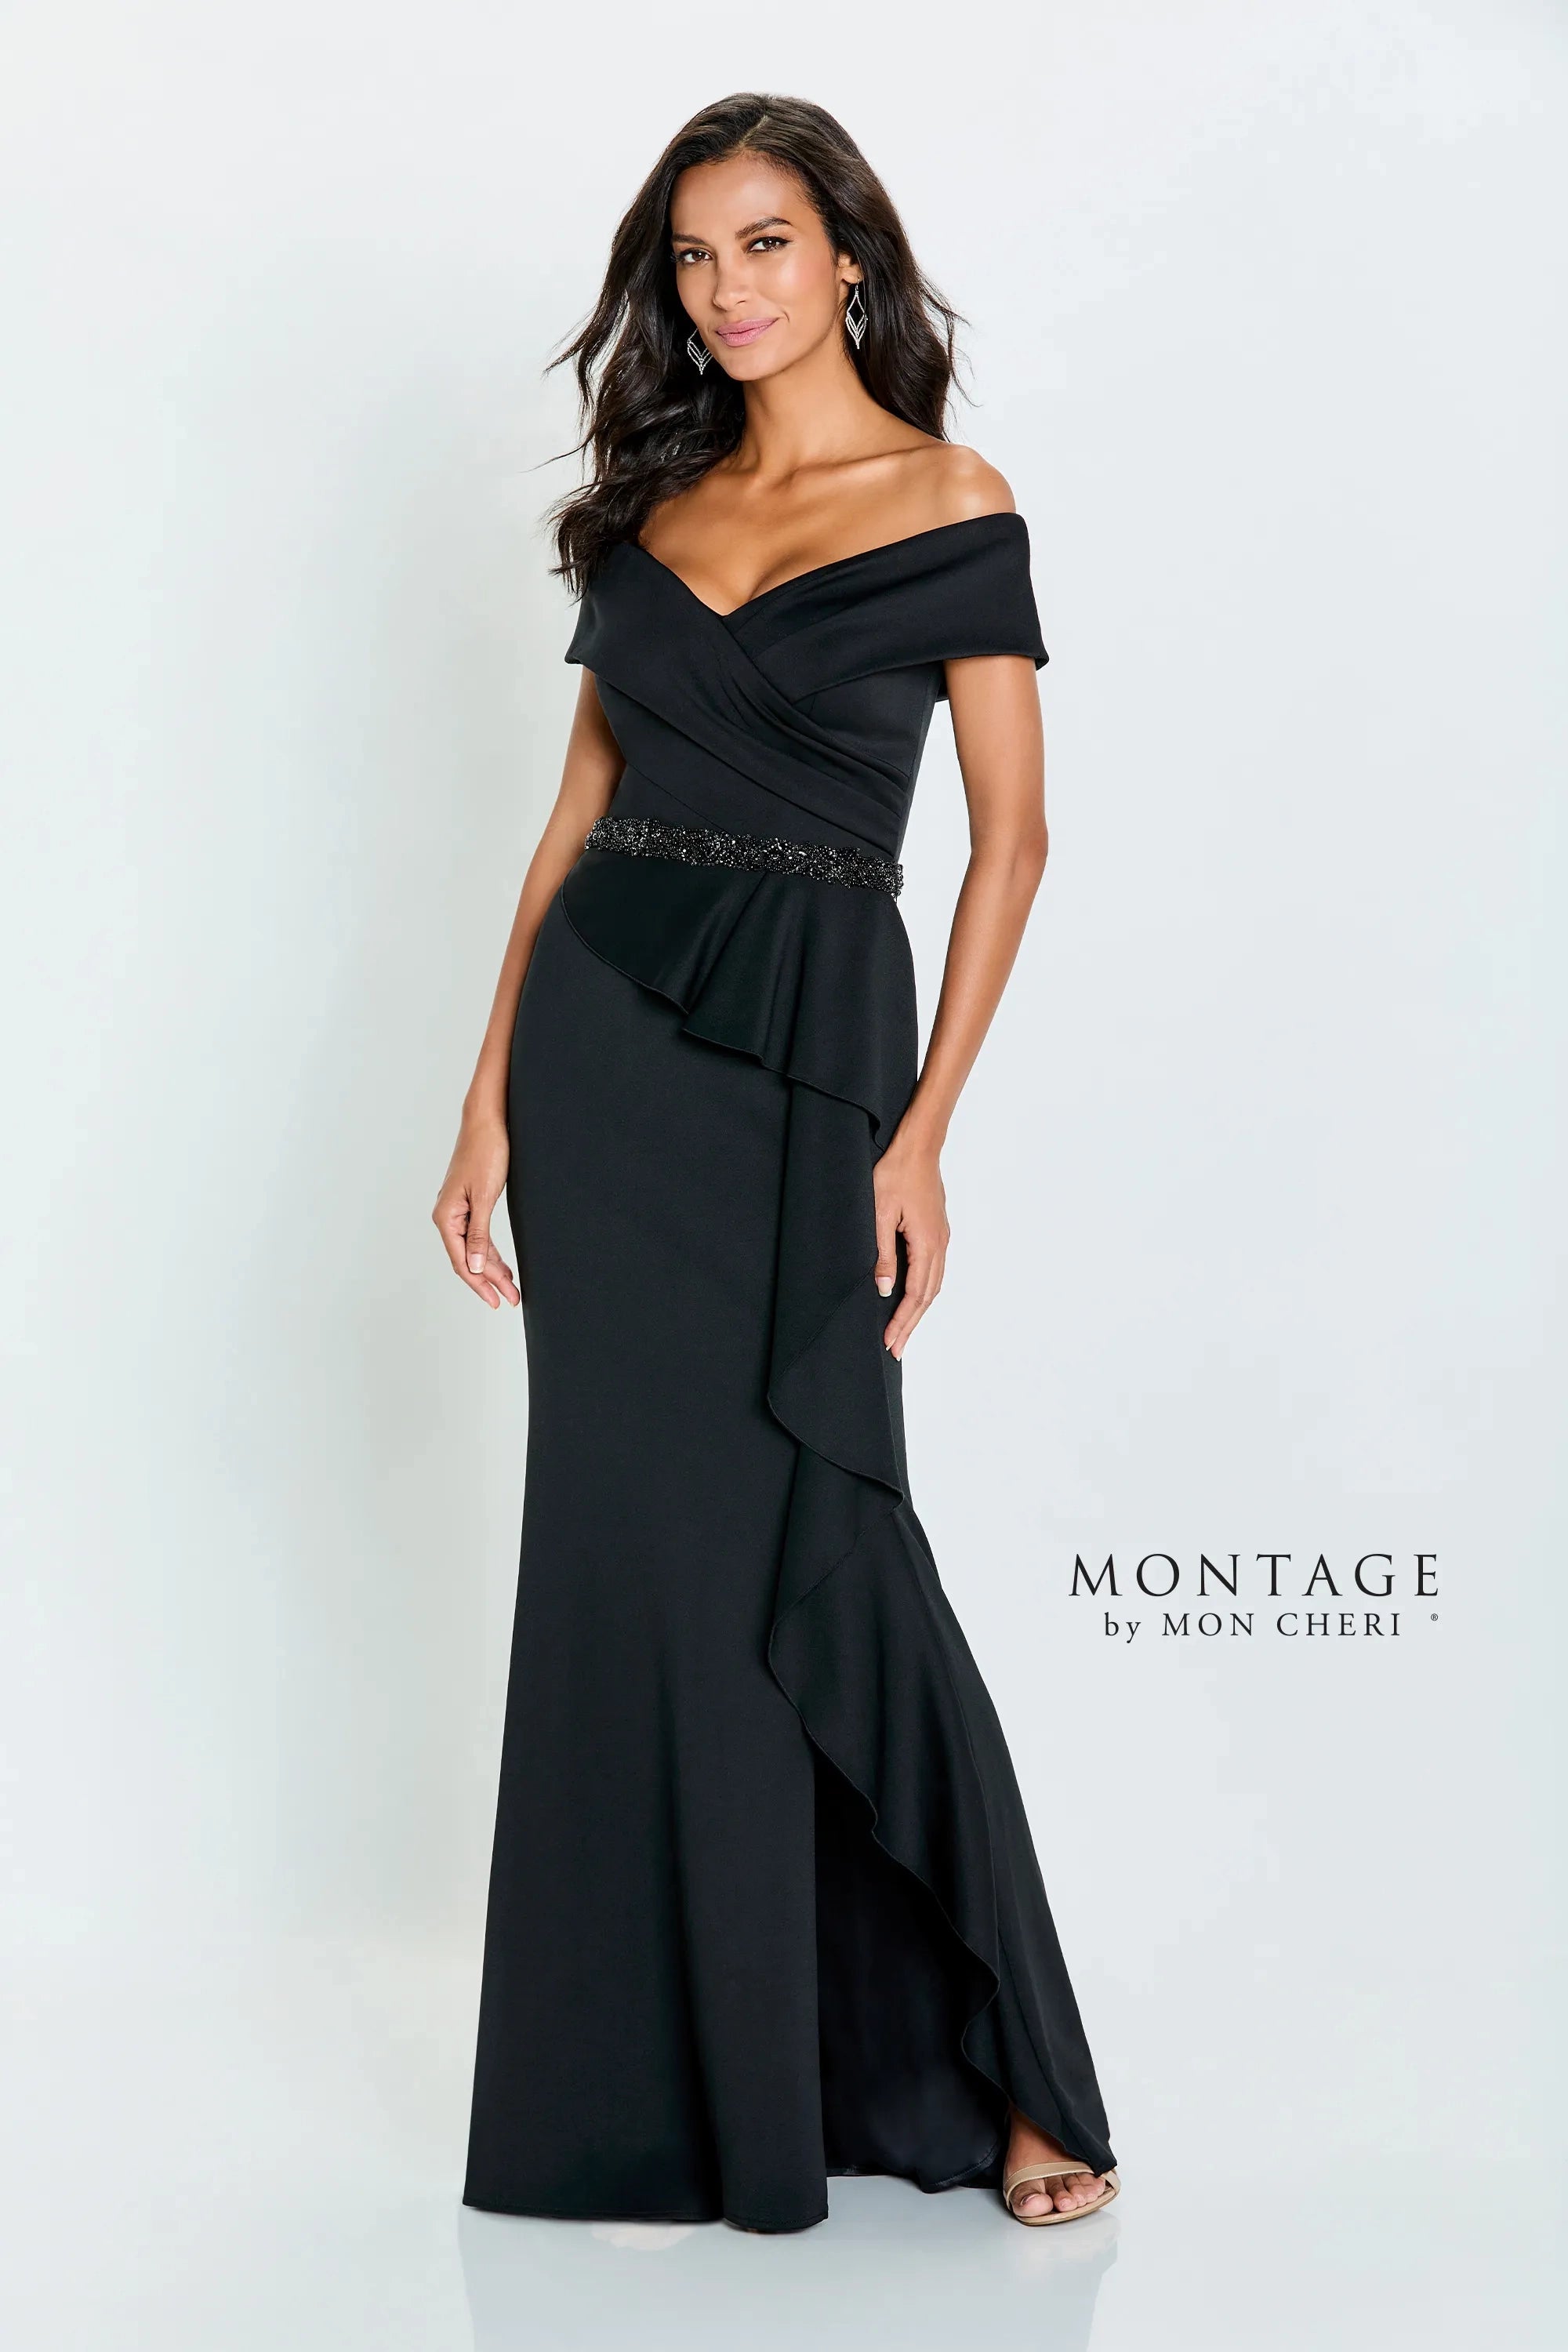 Image of Montage by Mon Cheri 221976W - Ruffle Draped Evening Gown